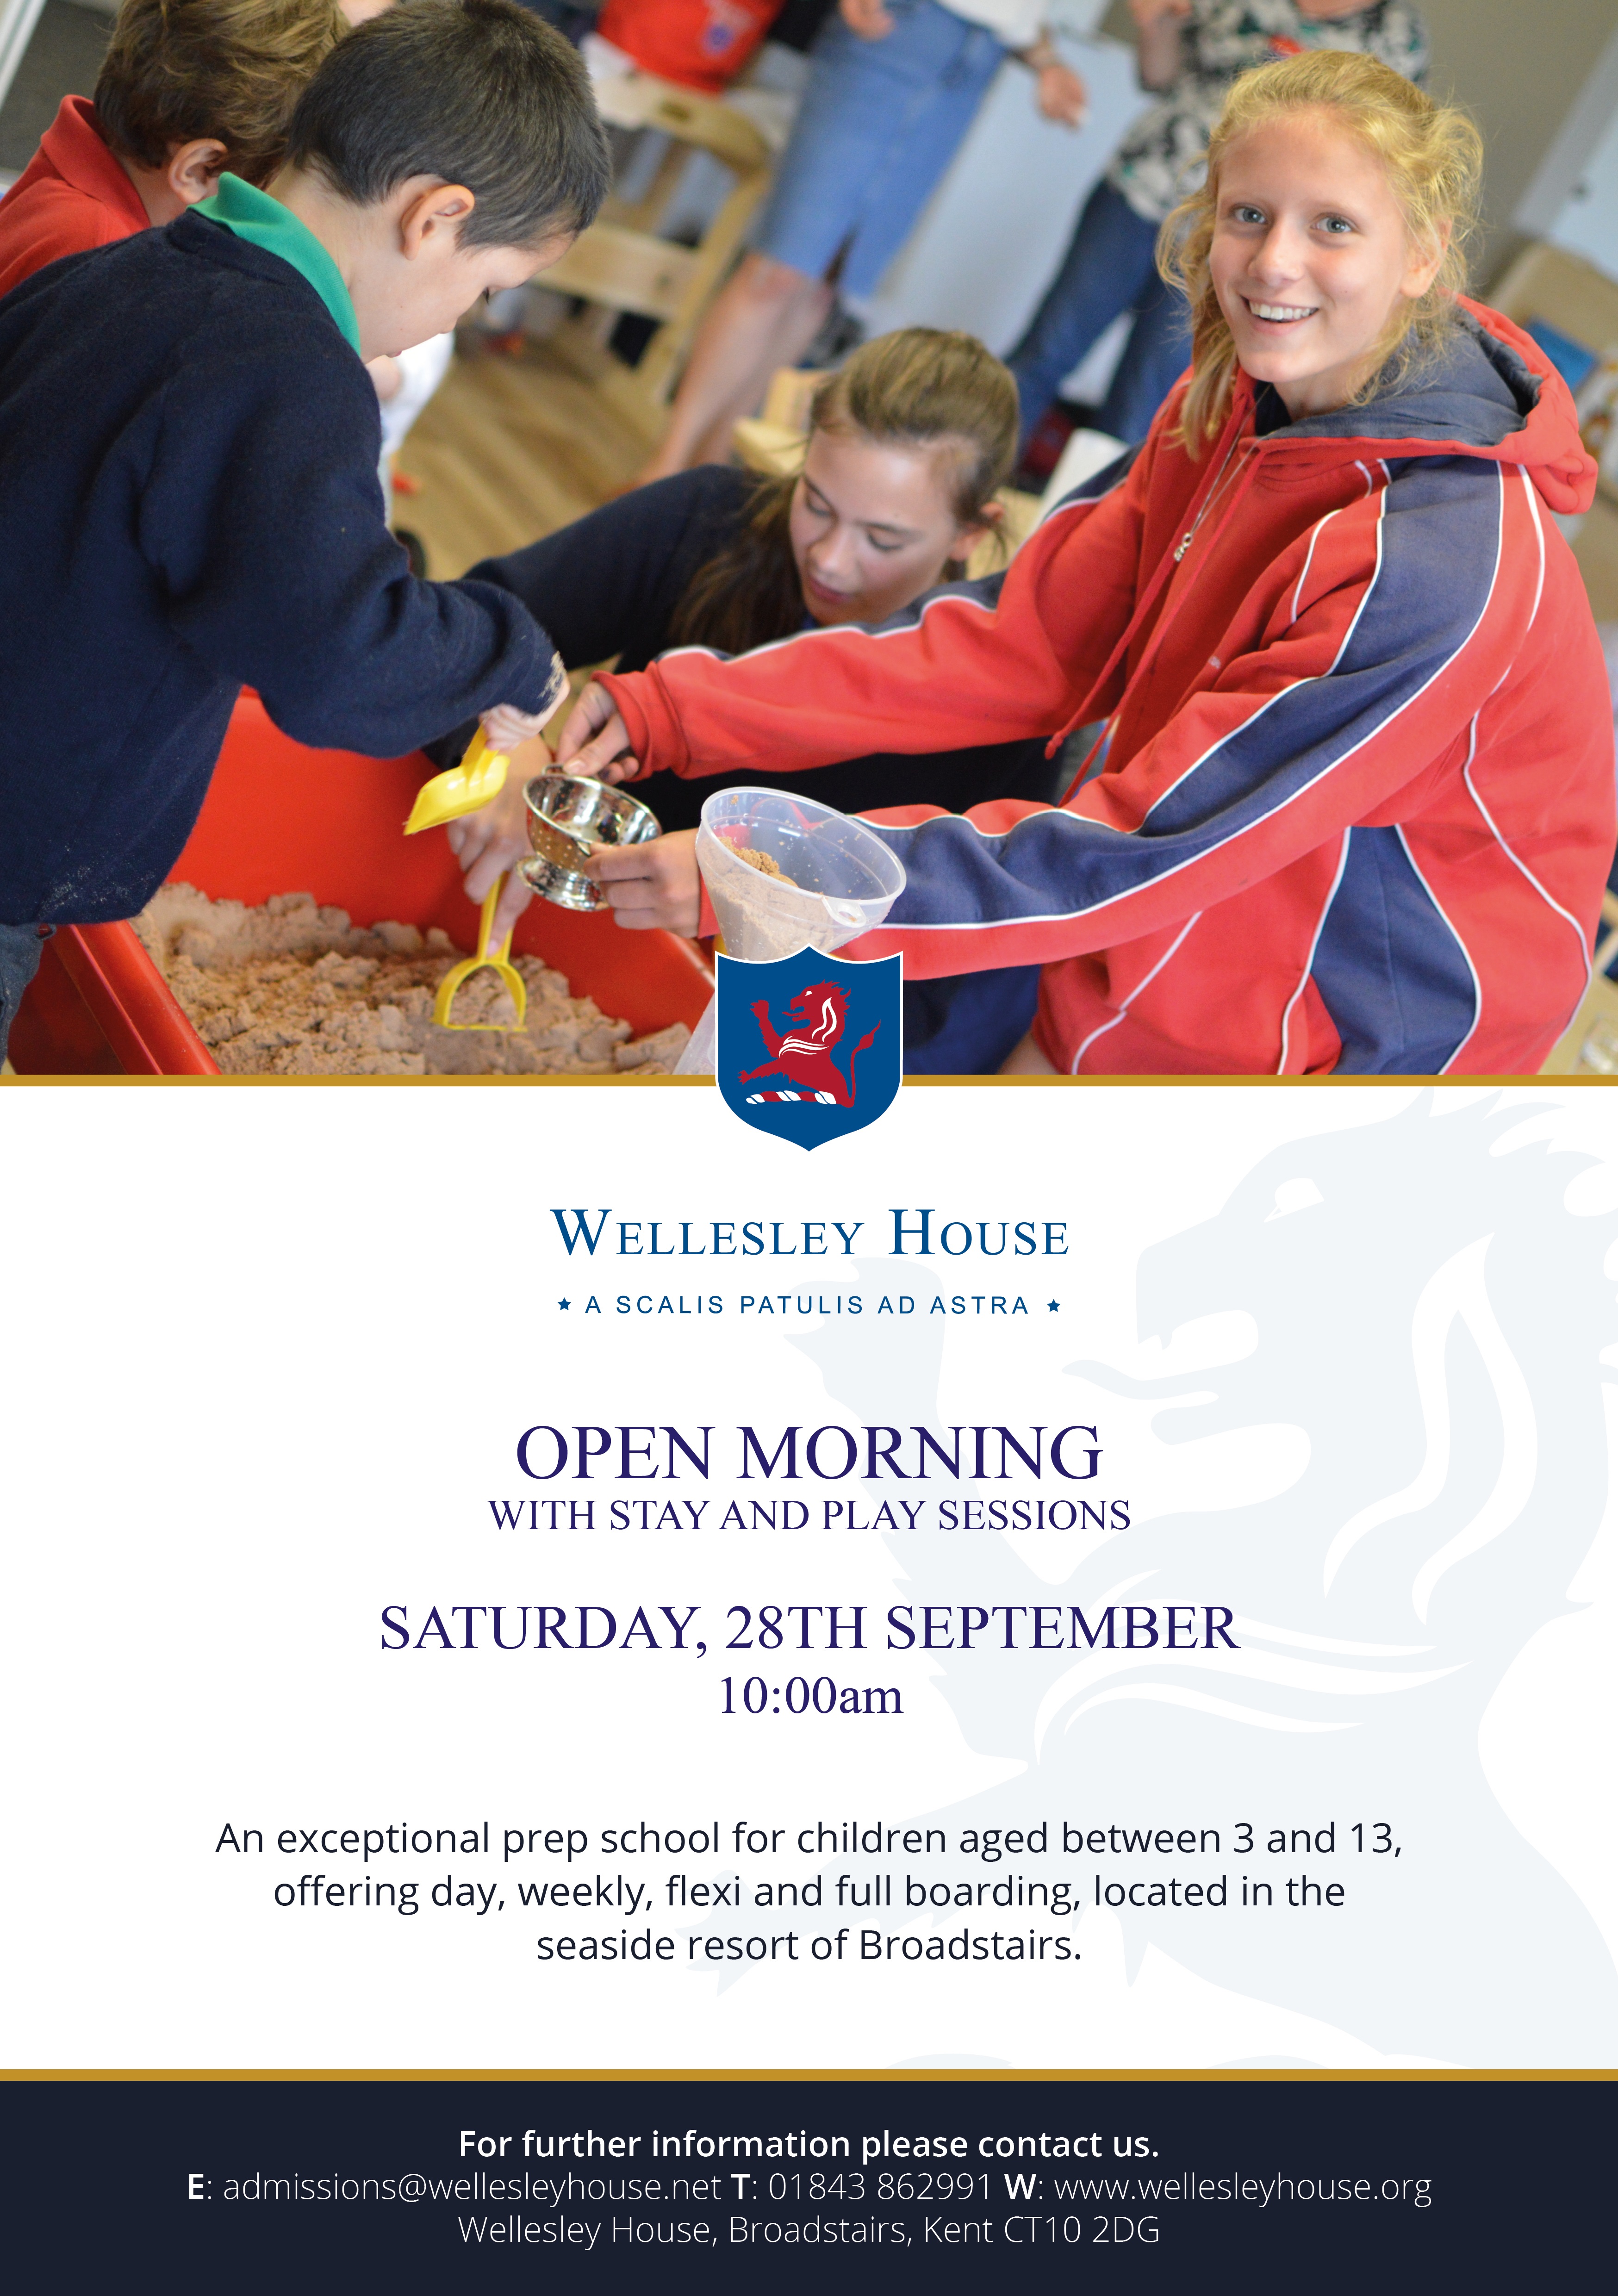 Image for the Wellesley House Open Morning news article